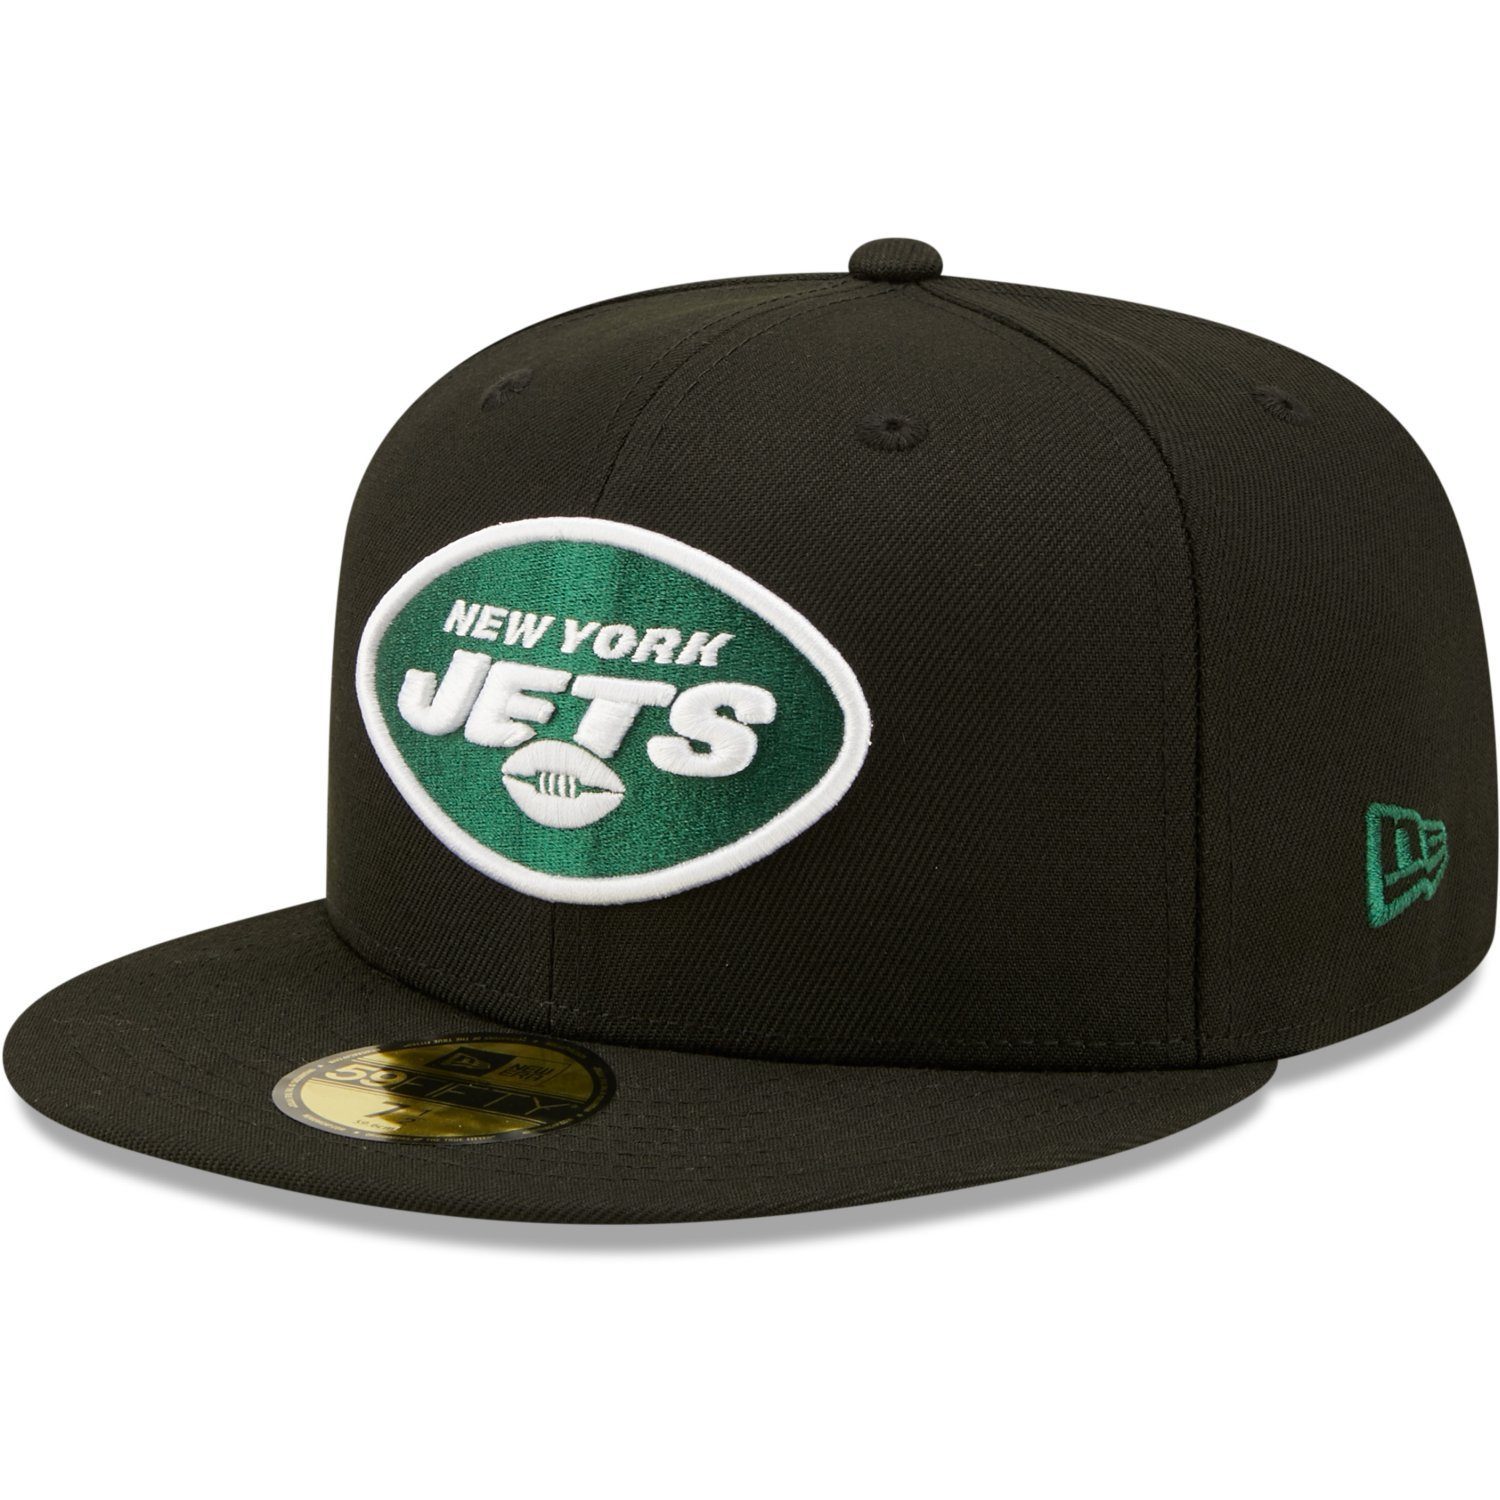 New New Fitted 59Fifty 50 Seasons Cap Jets Era York